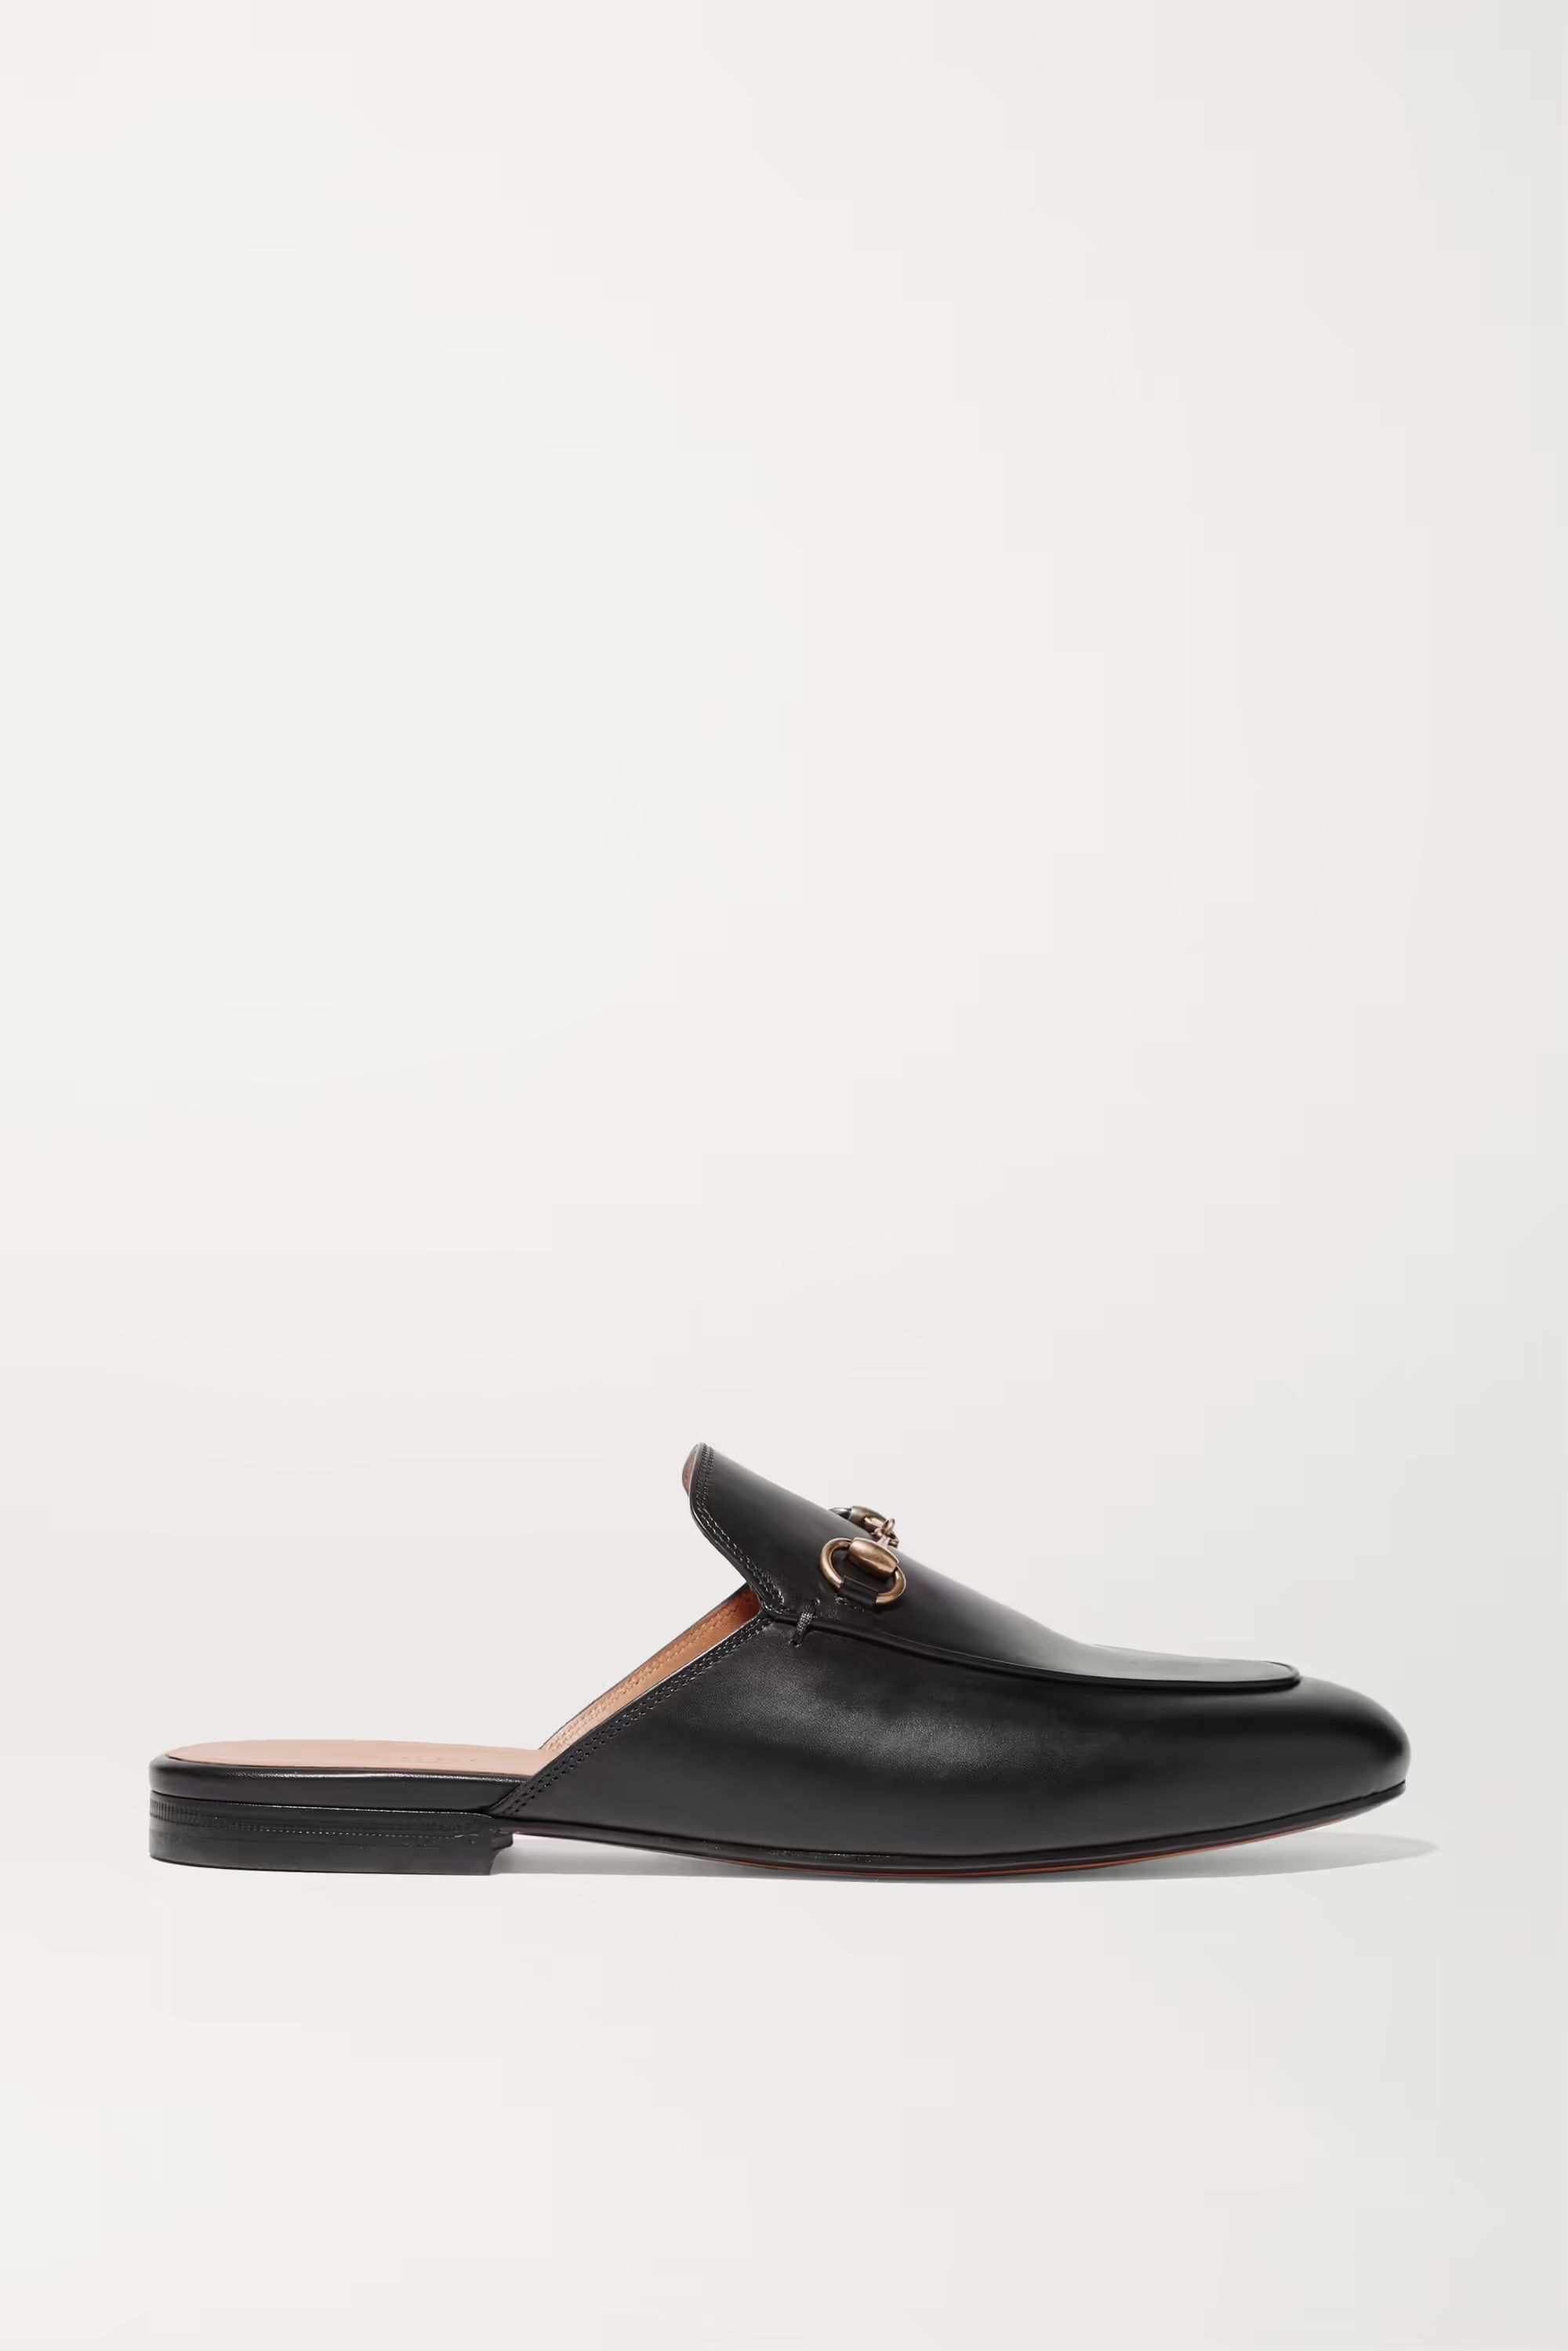 GUCCI Princetown horsebit-detailed leather slippers | NET-A-PORTER | NET-A-PORTER (US)